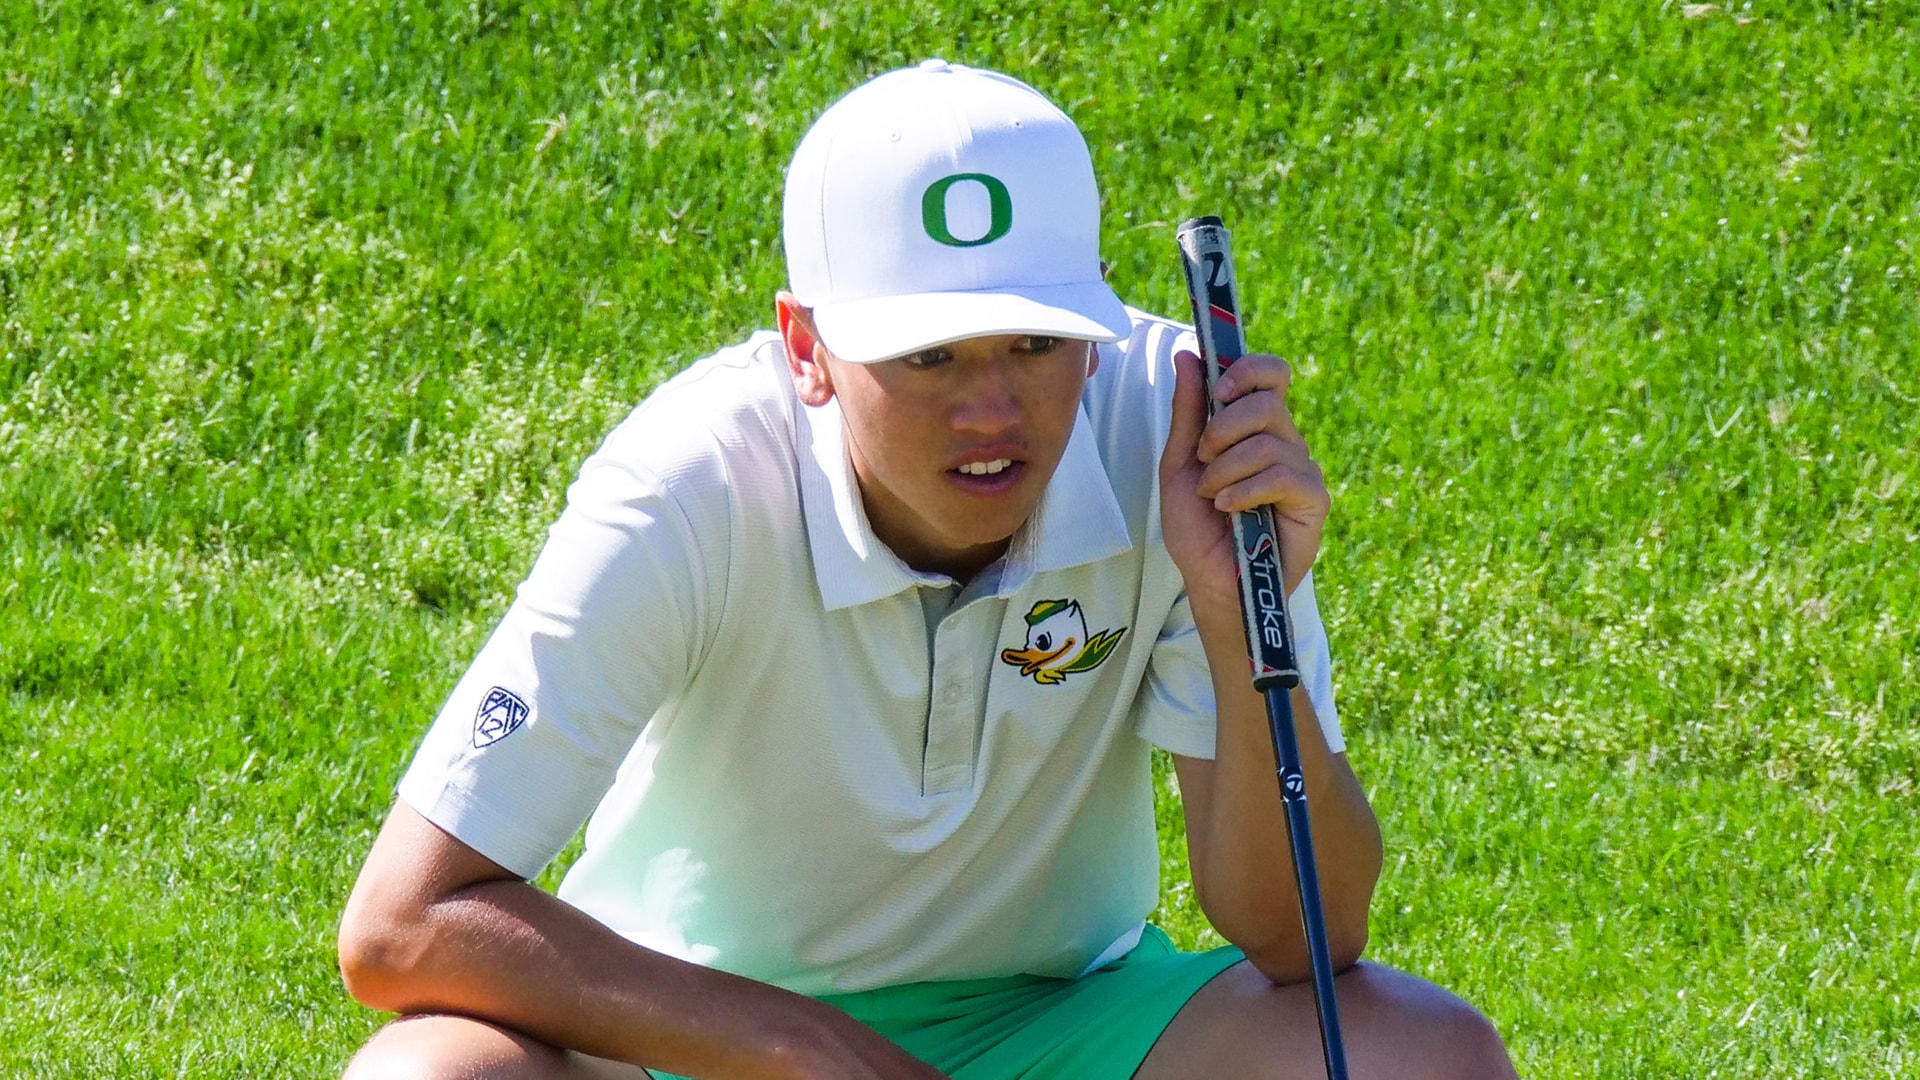 Oregon’s Greg Solhaug withdraws, subbed out at NCAAs after tee impales foot